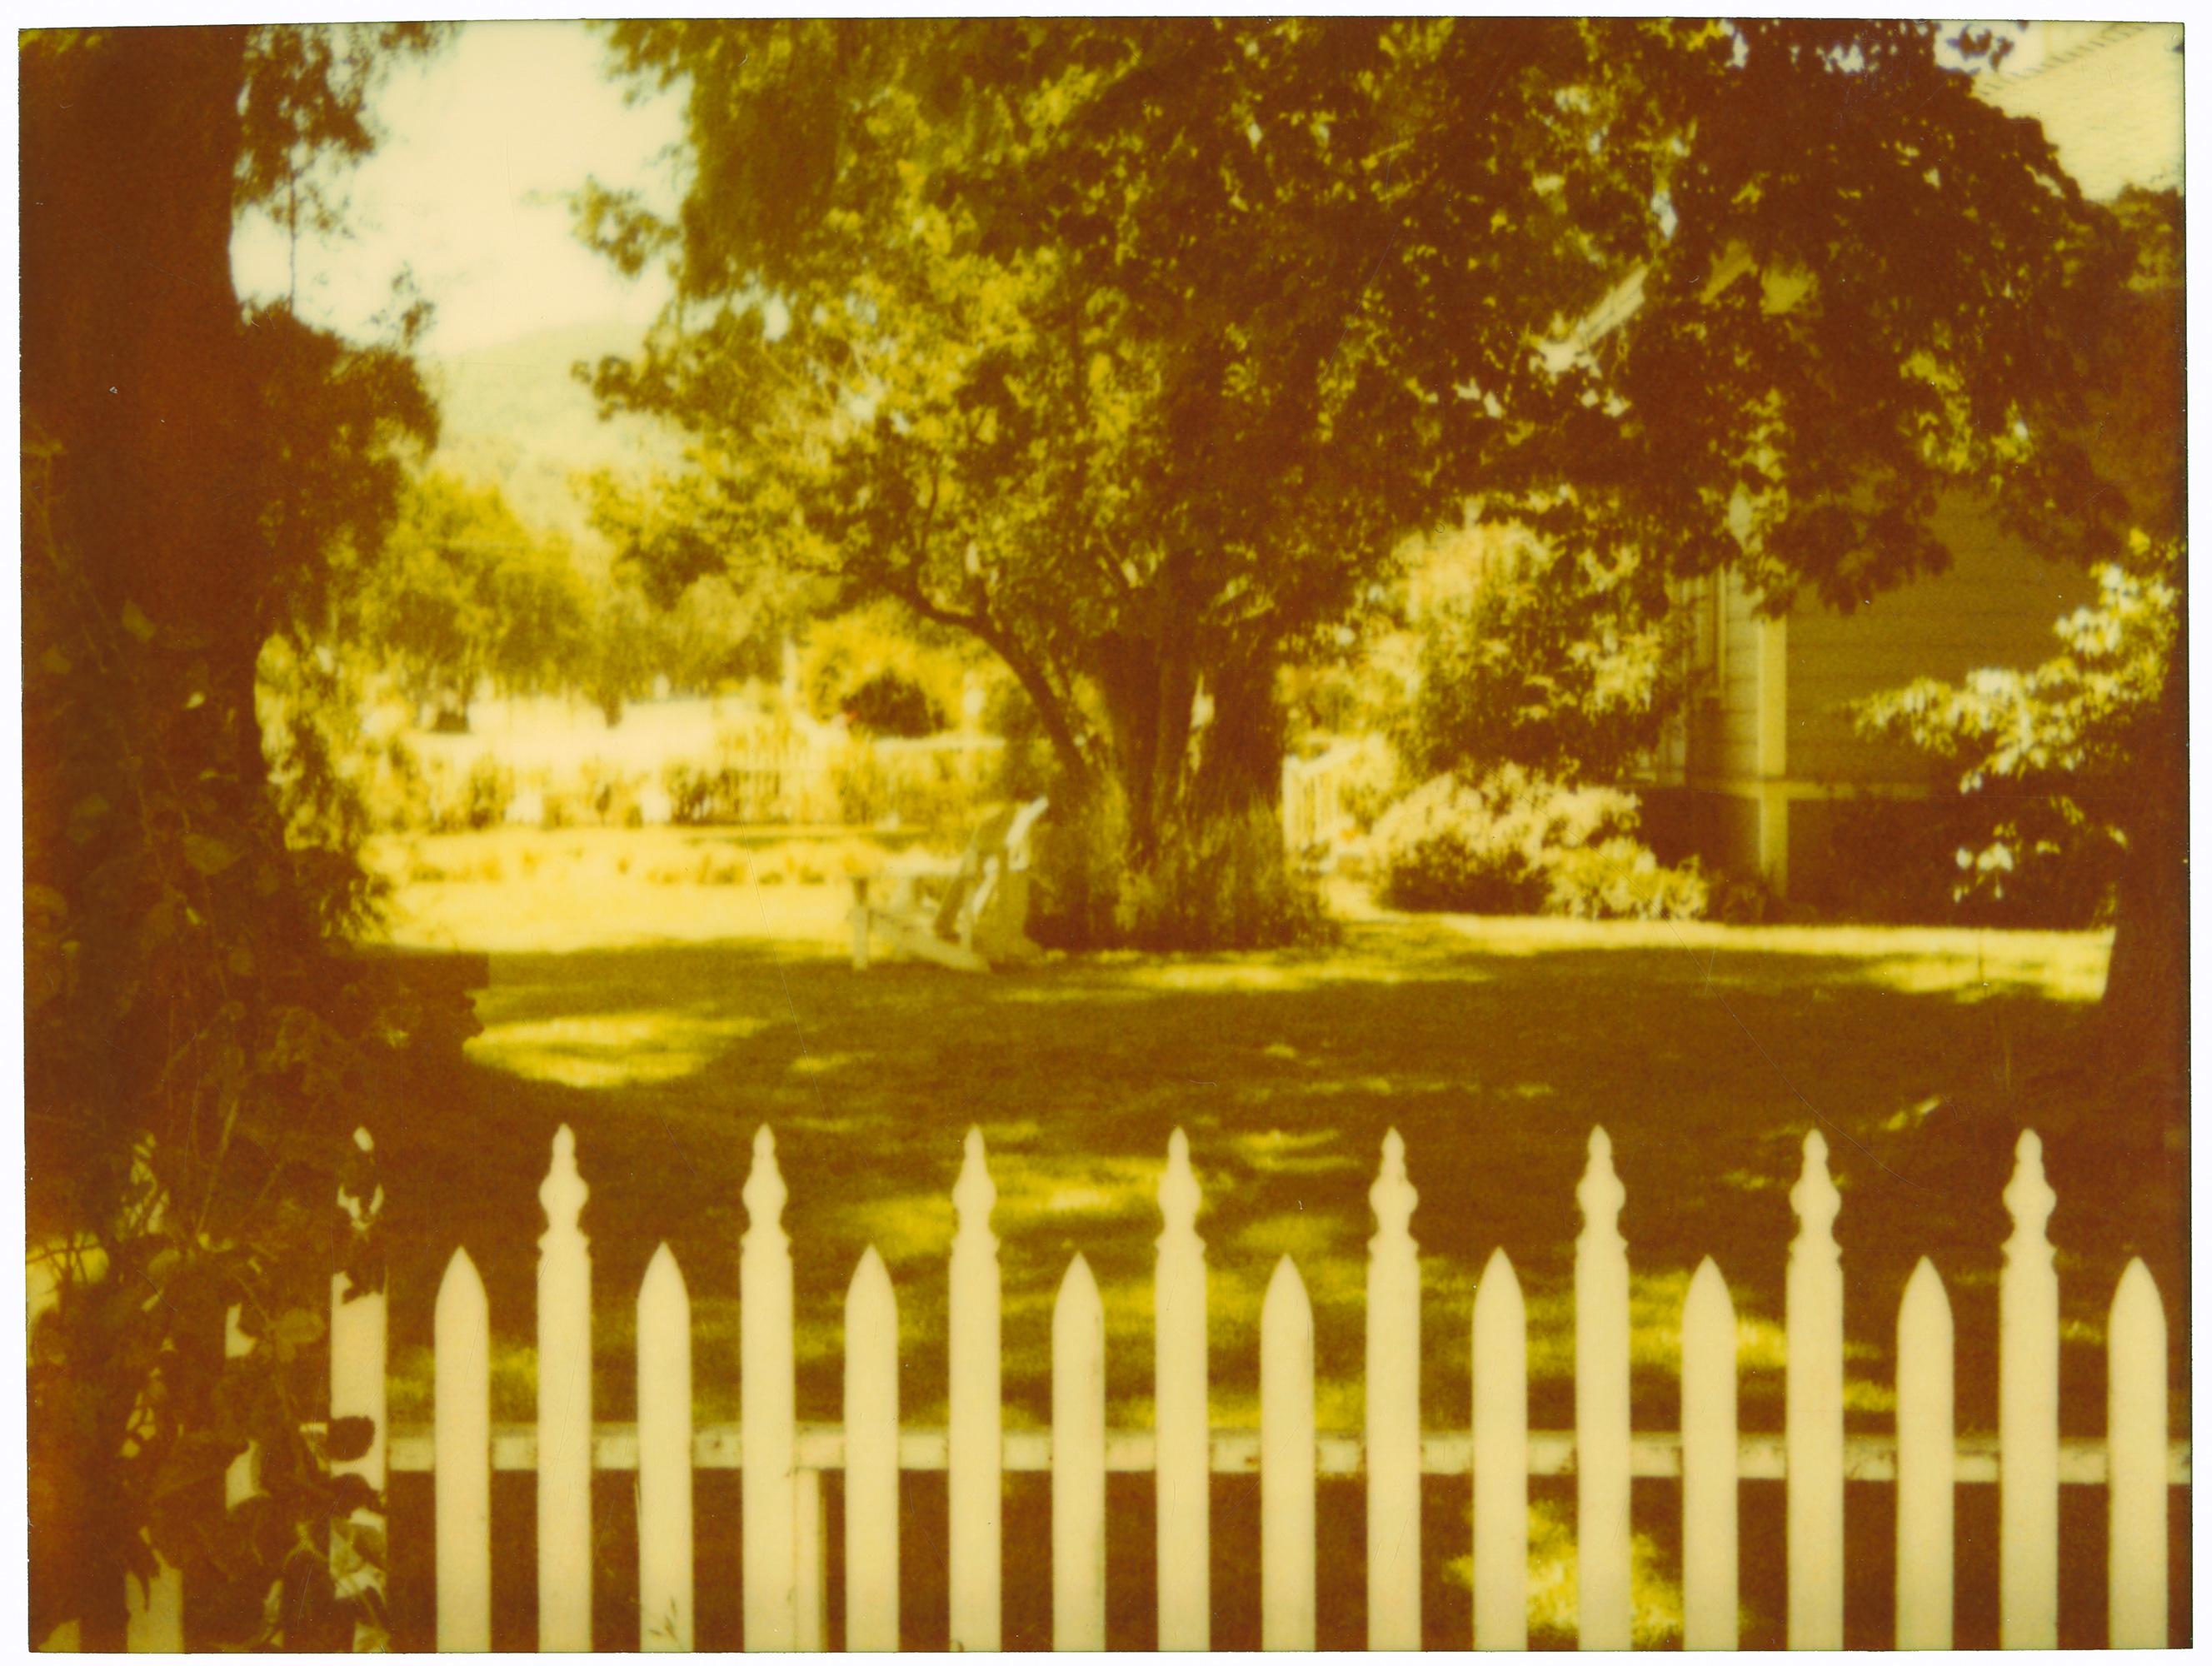 White Picket Fence (Suburbia), diptych, 2004, 
Edition of 3/5, 60x80cm each, installed 60x170cm,

Analog C-Prints, hand-printed by the artist, based on a Stefanie Schneider expired Polaroid photograph, 
mounted on Aluminum with matte UV-Projection,